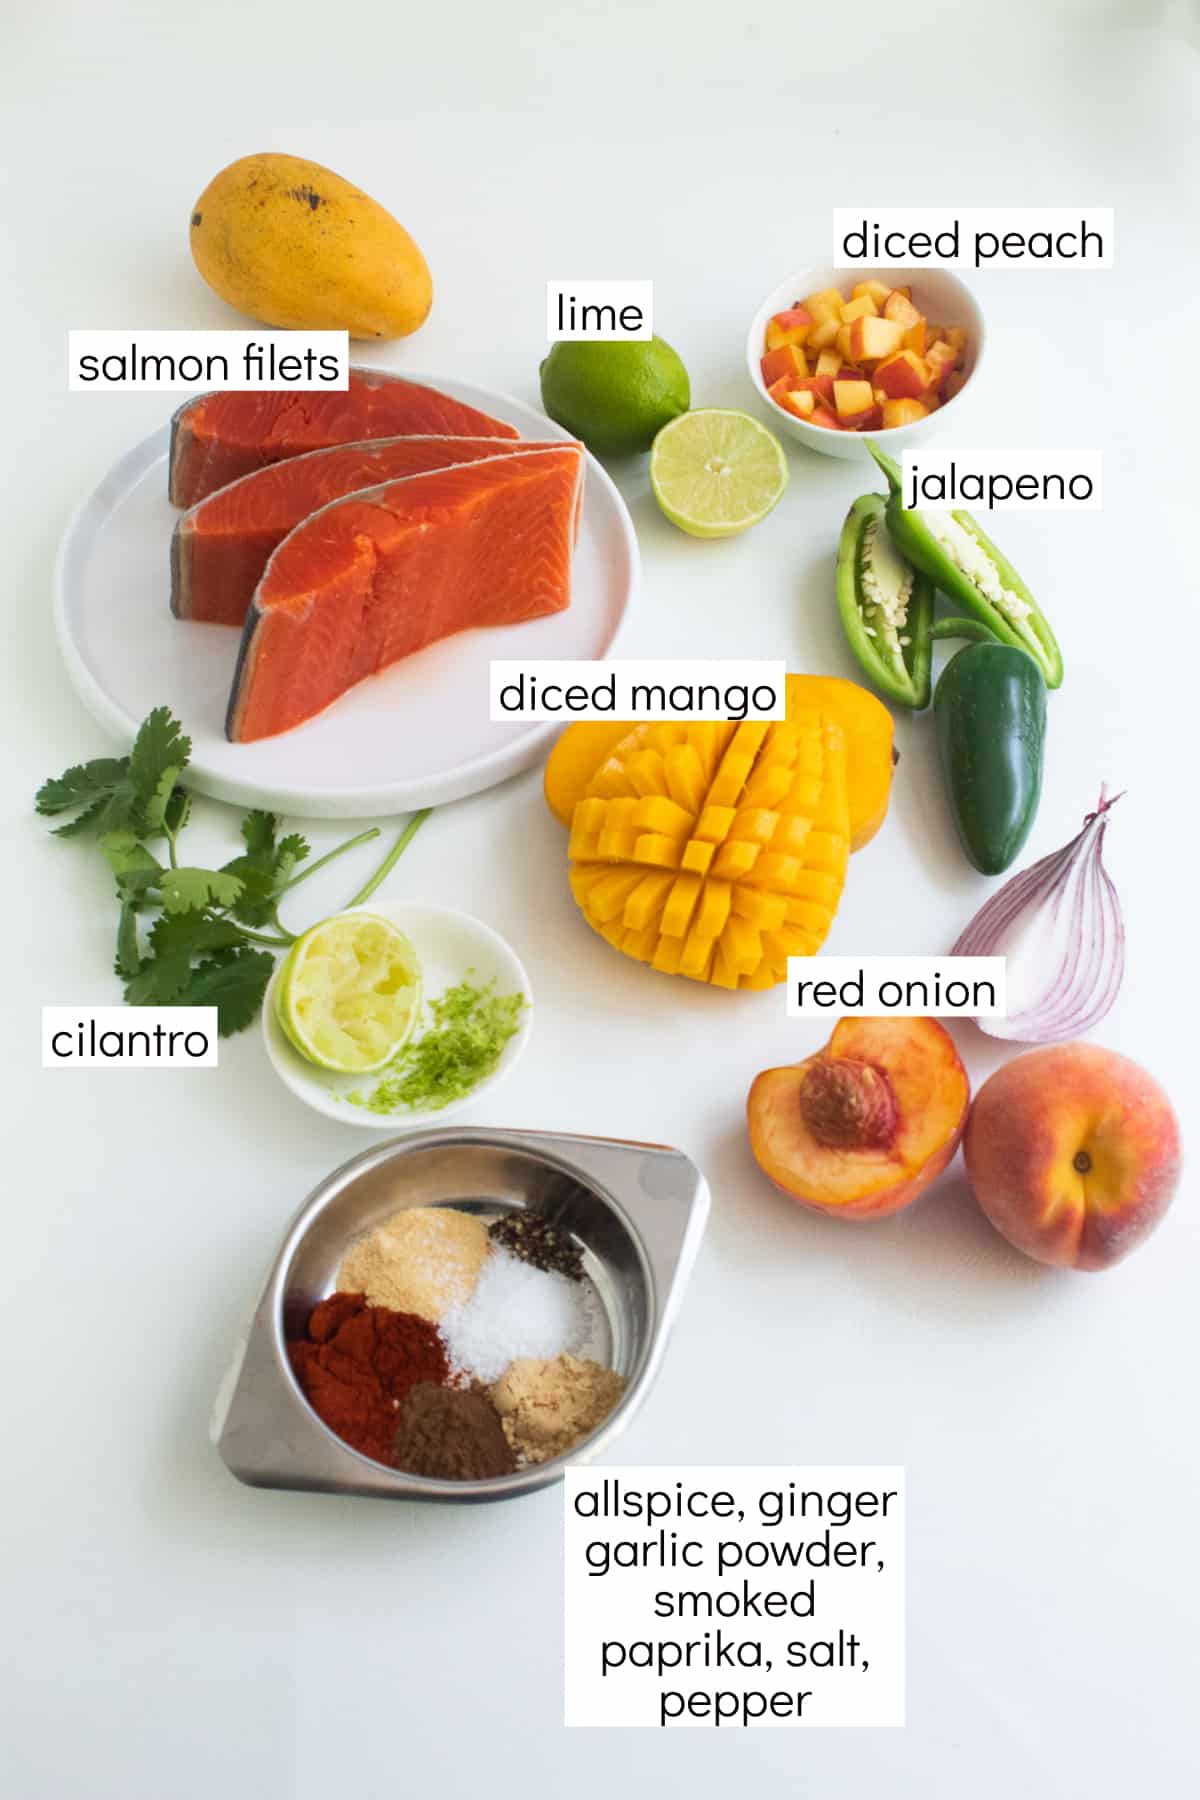 The ingredients for the recipe are arranged over a white surface with labels in white boxes including: salmon filets, lime, diced peach, jalapeno, diced mango, cilantro, red onion, and spices.